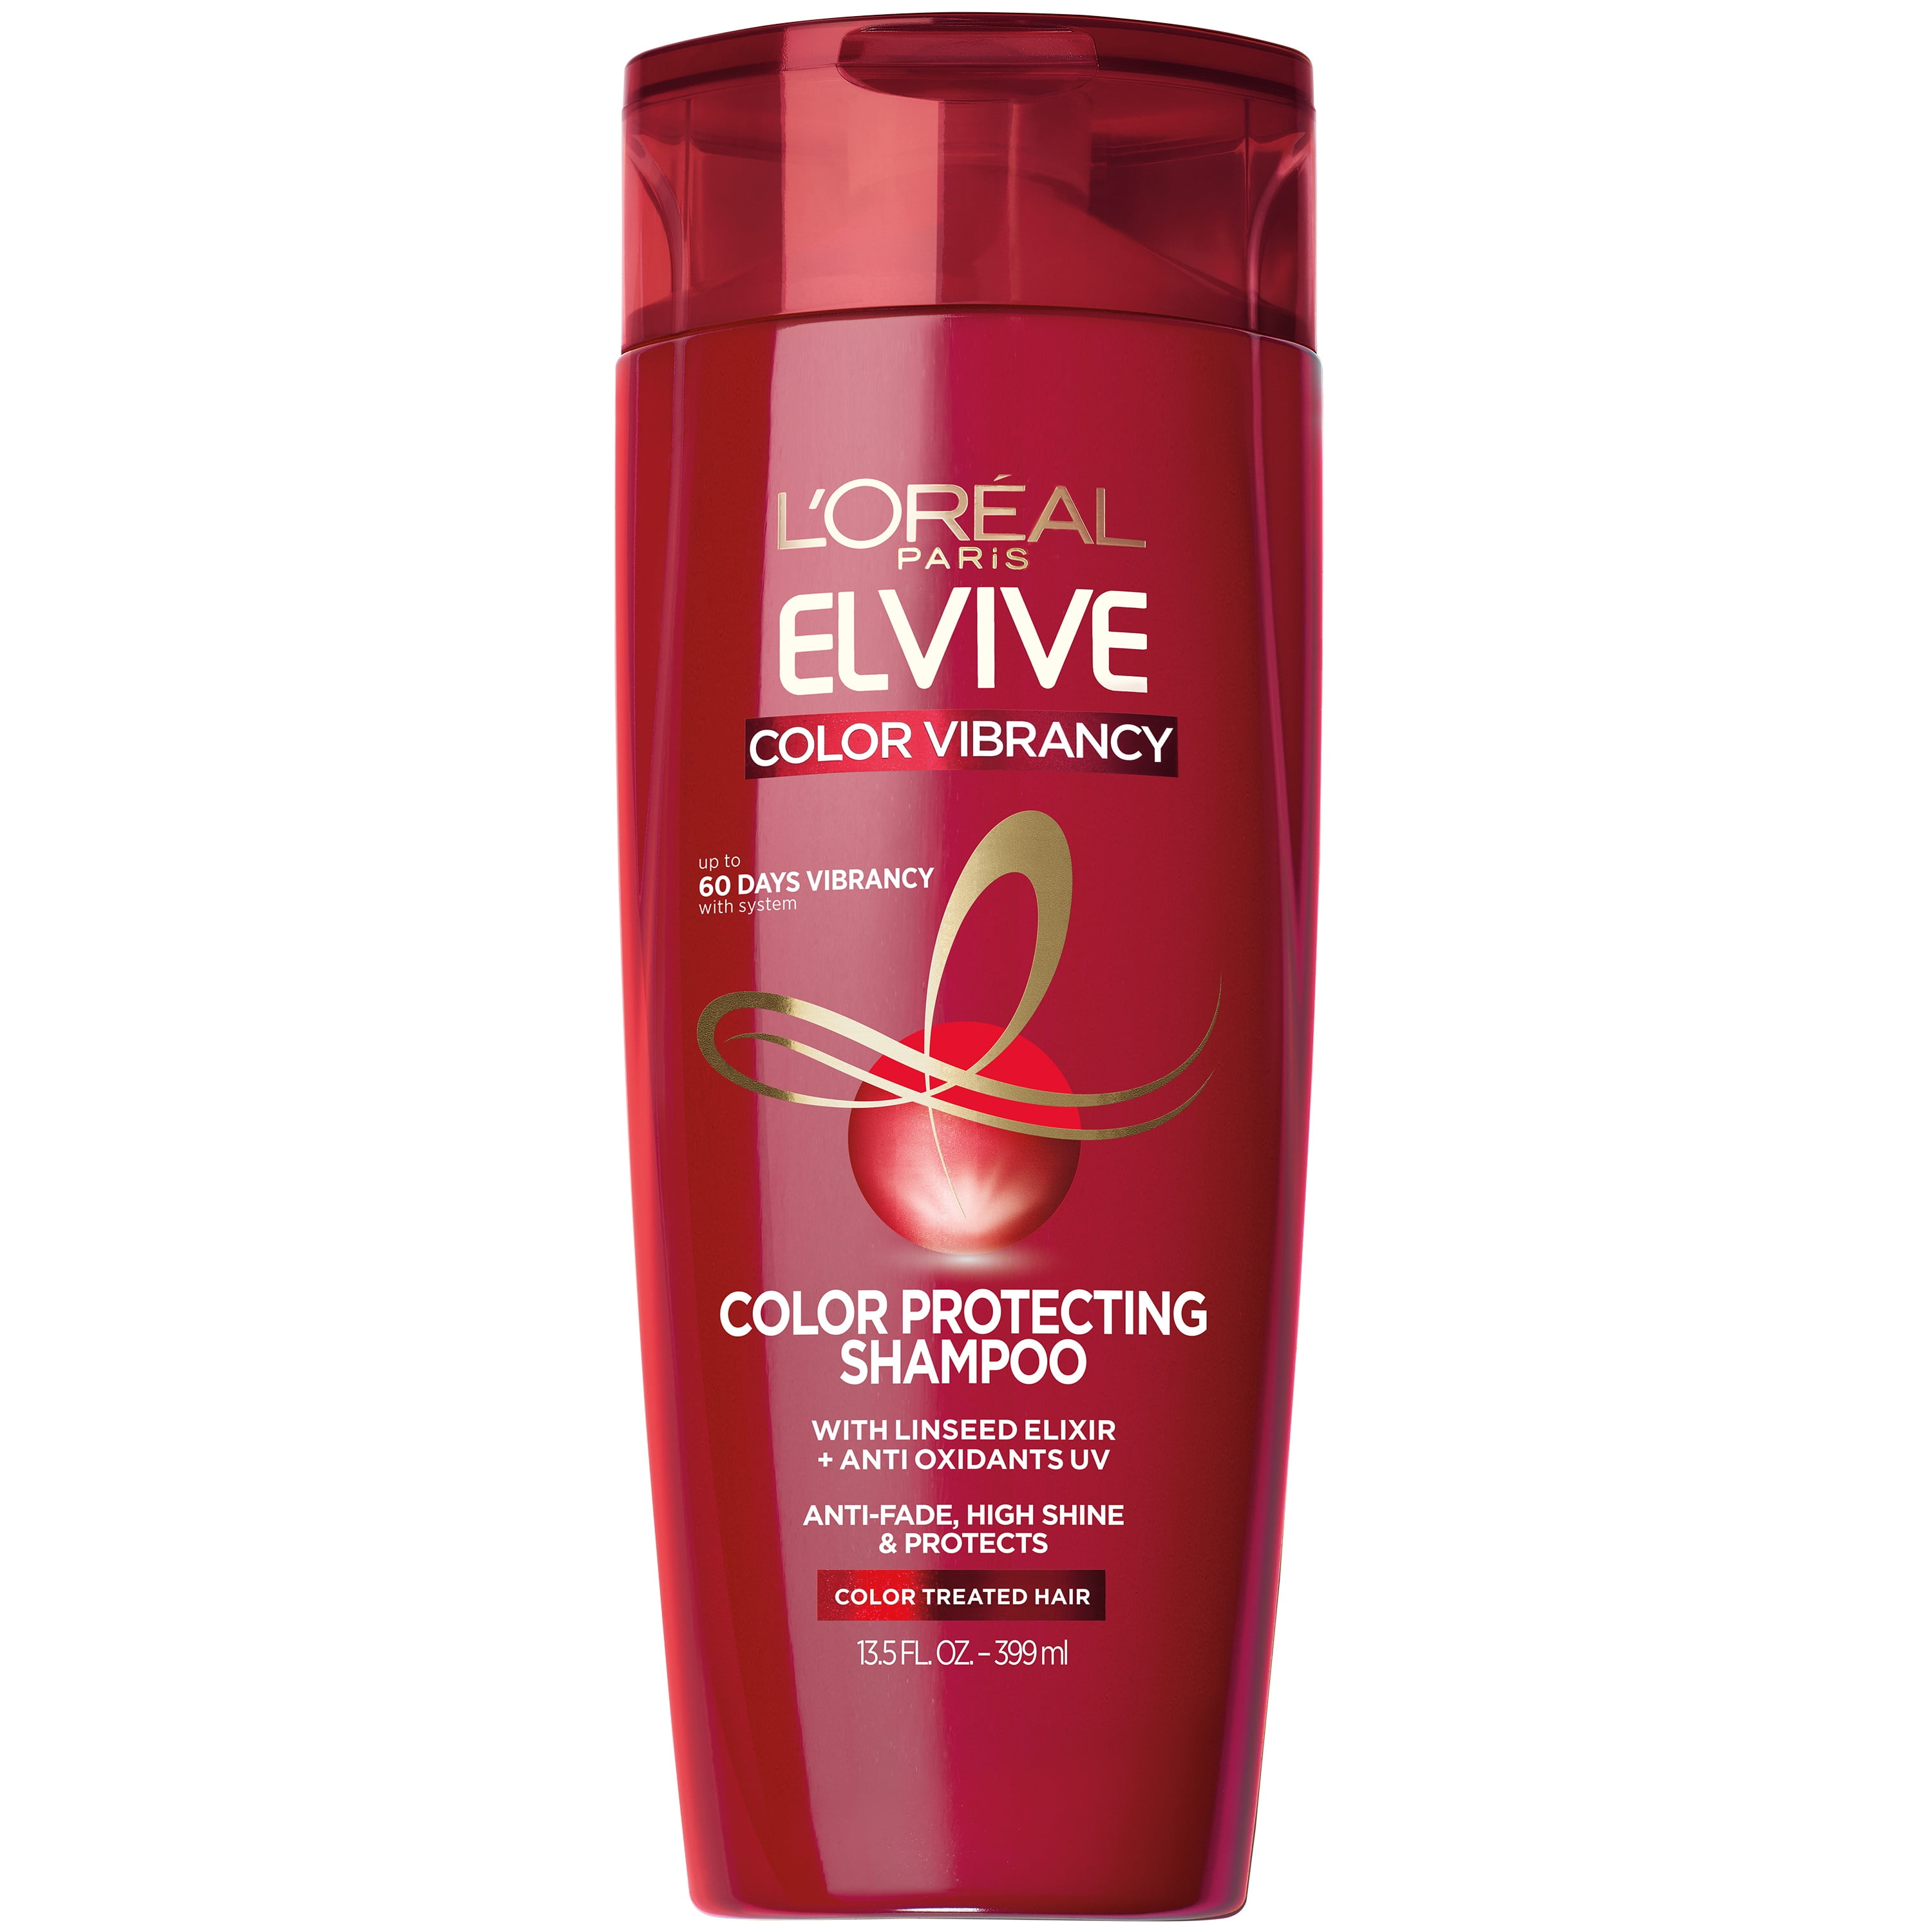 L'Oreal Paris Elvive Color Vibrancy Protecting Shampoo for Color Treated Hair, 13.5 fl oz